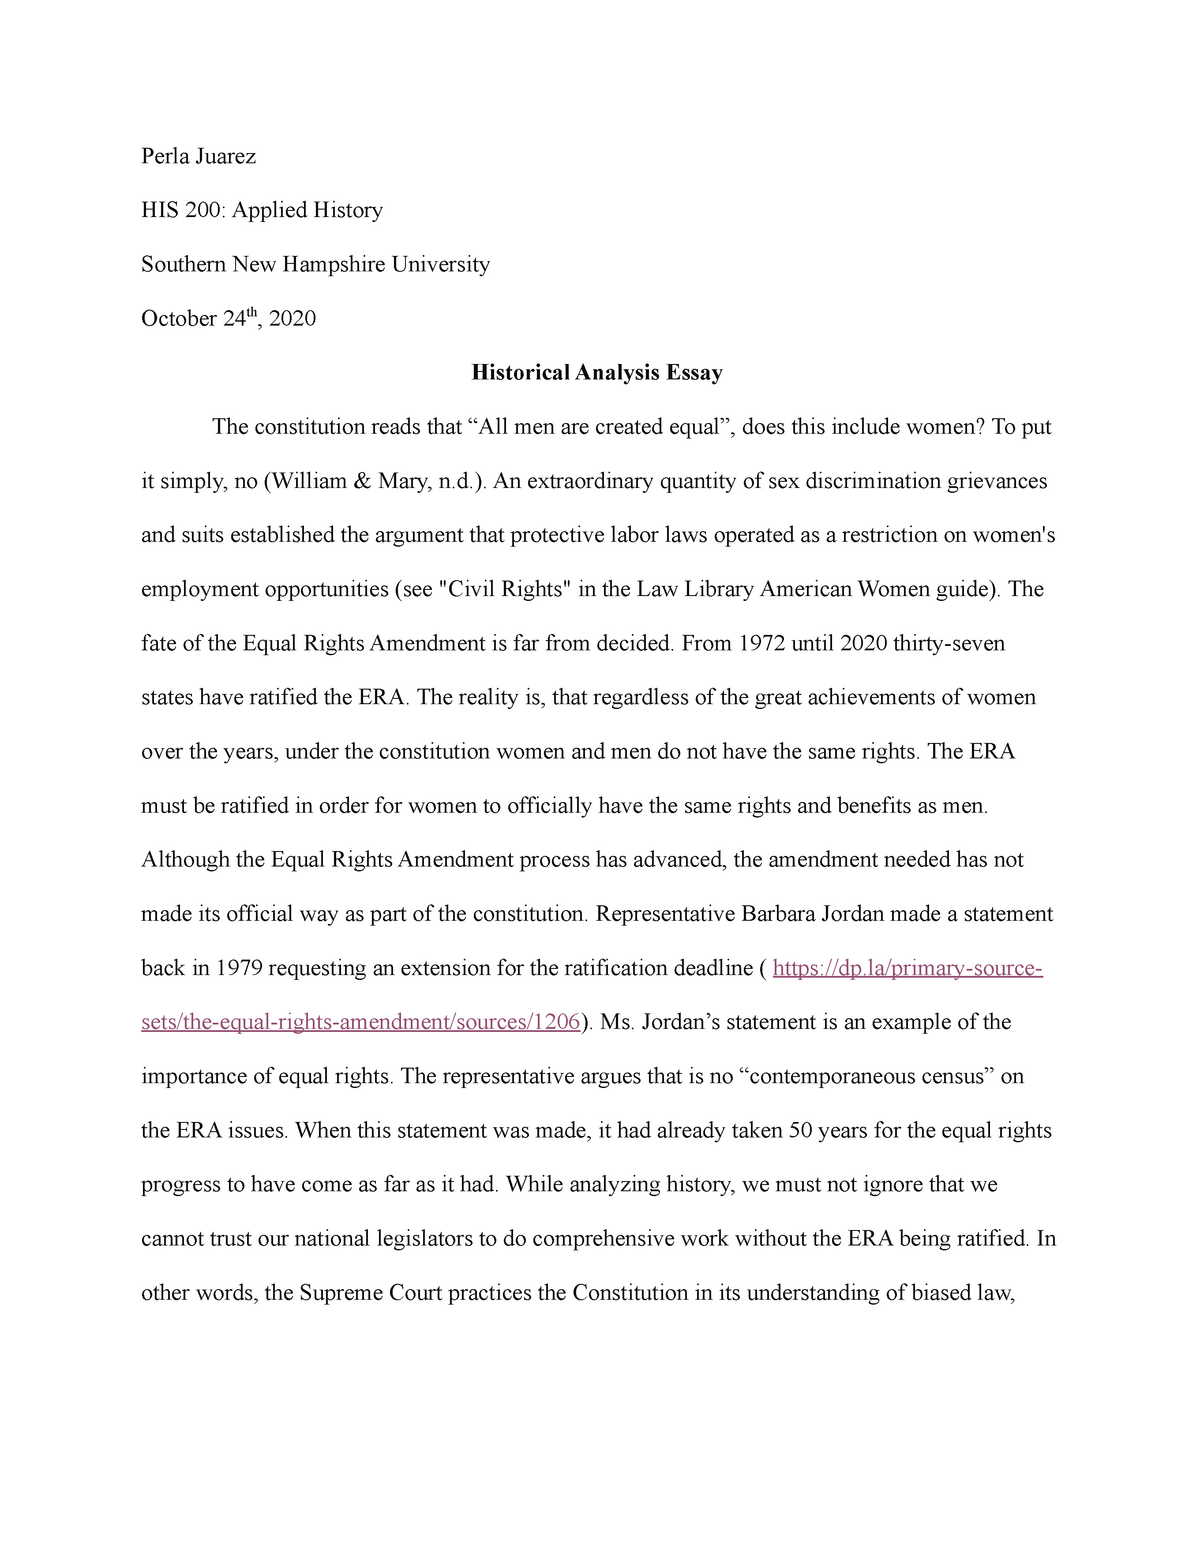 example of historical analysis essay